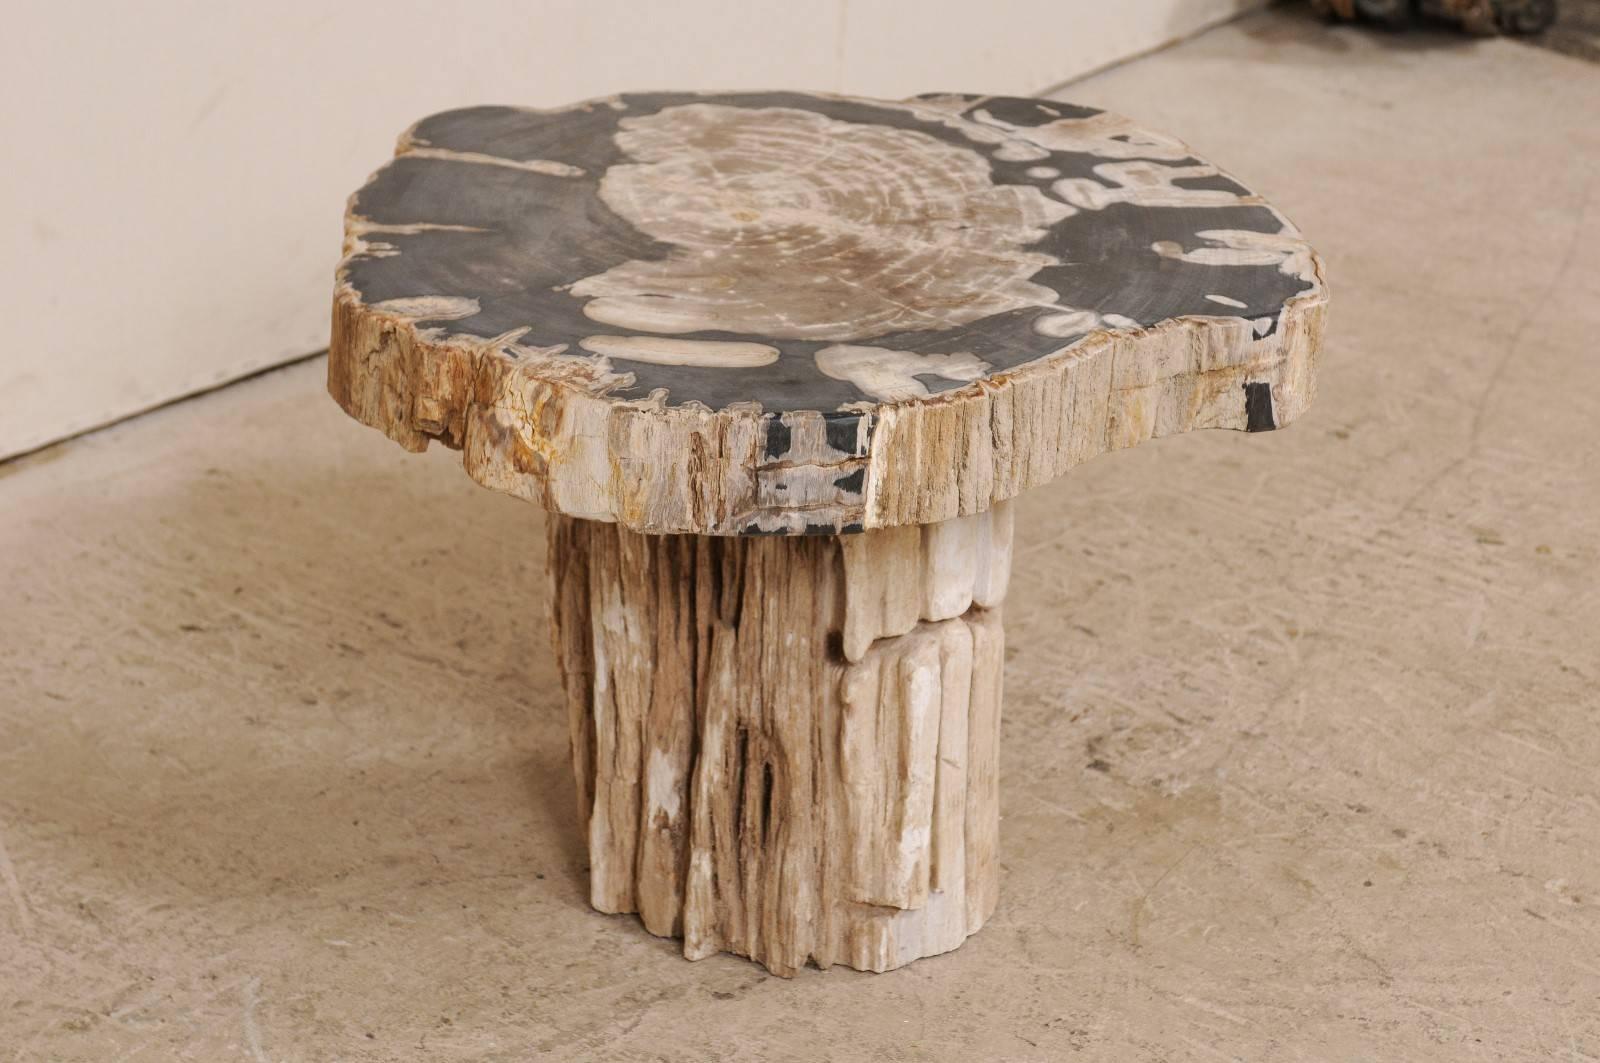 Indonesian Petrified Wood Pedestal Coffee Table in Cream, Beige and Black Hues